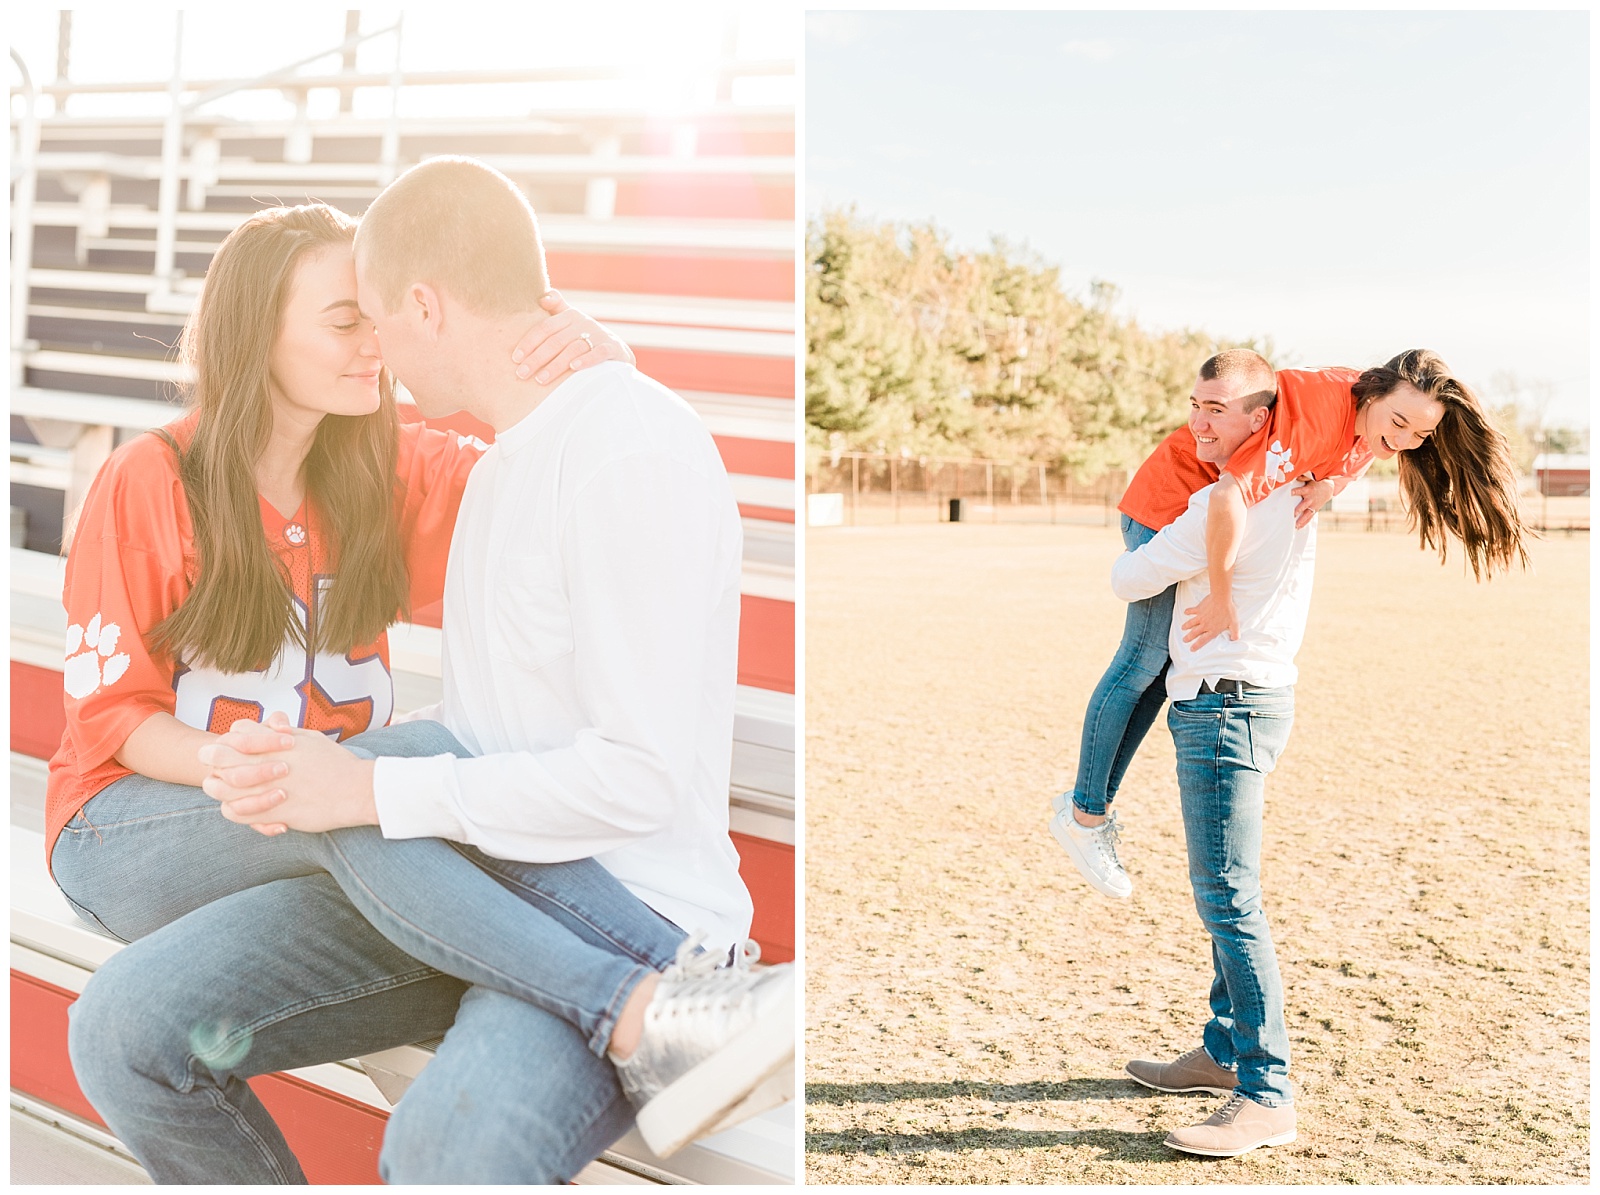 New Jersey, Engagement Session, Wedding Photographer, NFL, Coach, LA Chargers, Football, Athletic, Sporty, Jersey, Fun, Playful